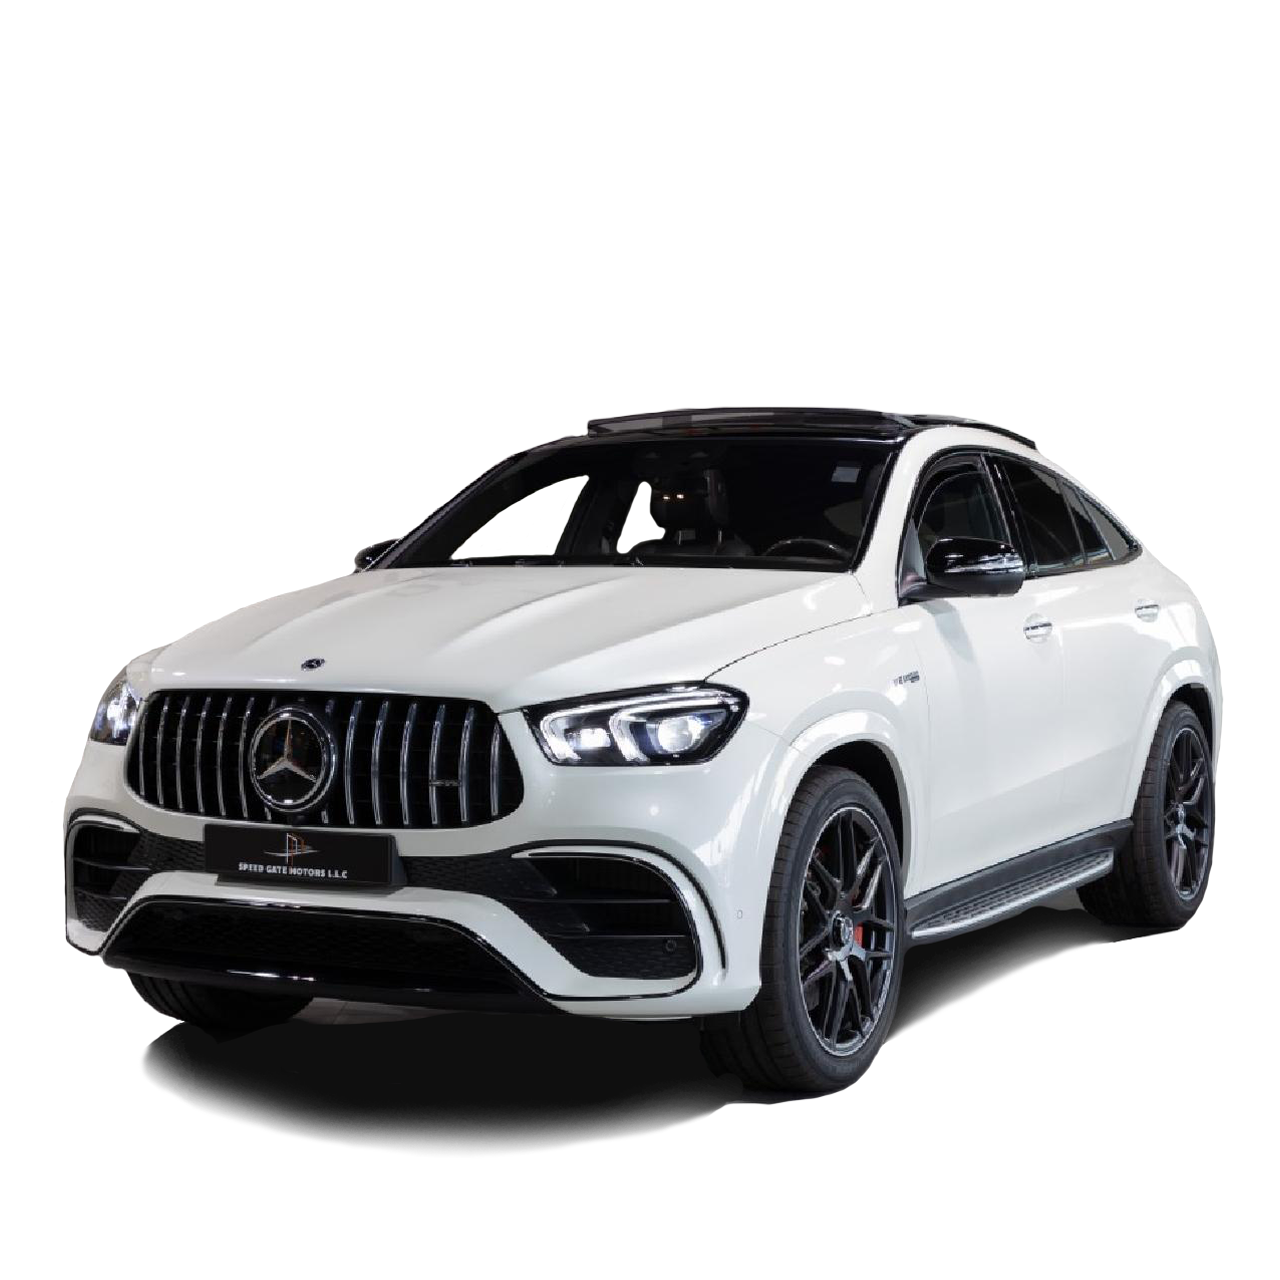 Mercedes GLE 63S COUPE A/T PTR MODEL 2022 - 0 KM